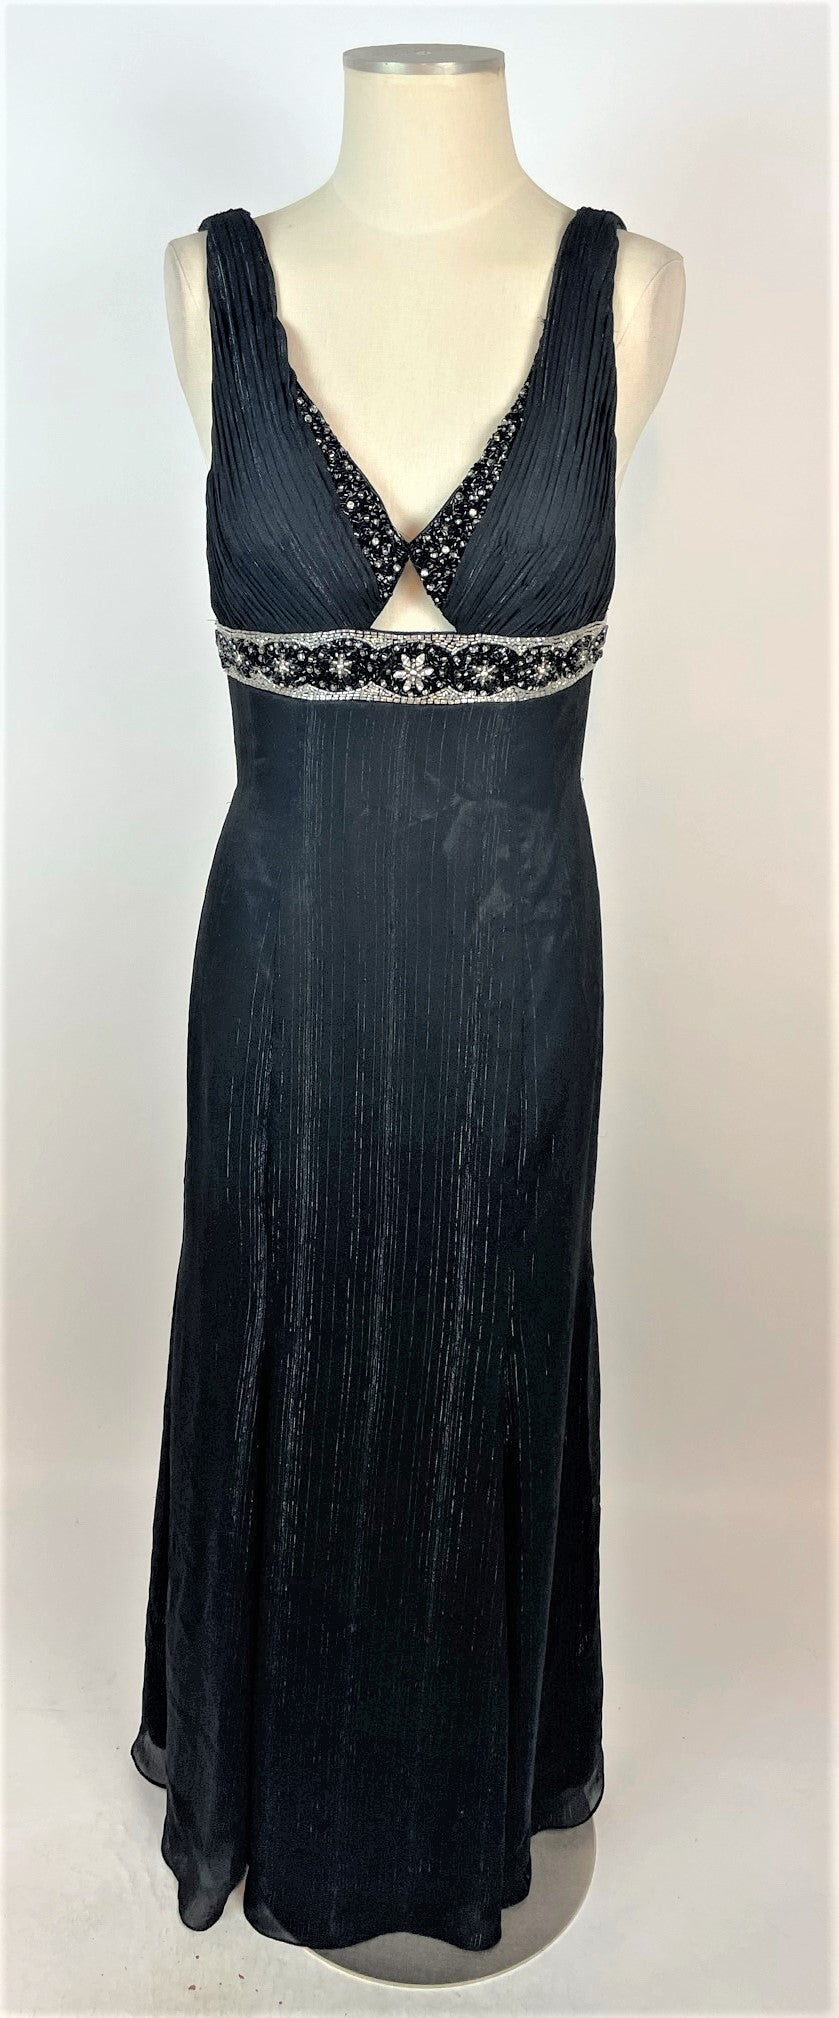 Black Beaded Top Evening Gown 1158